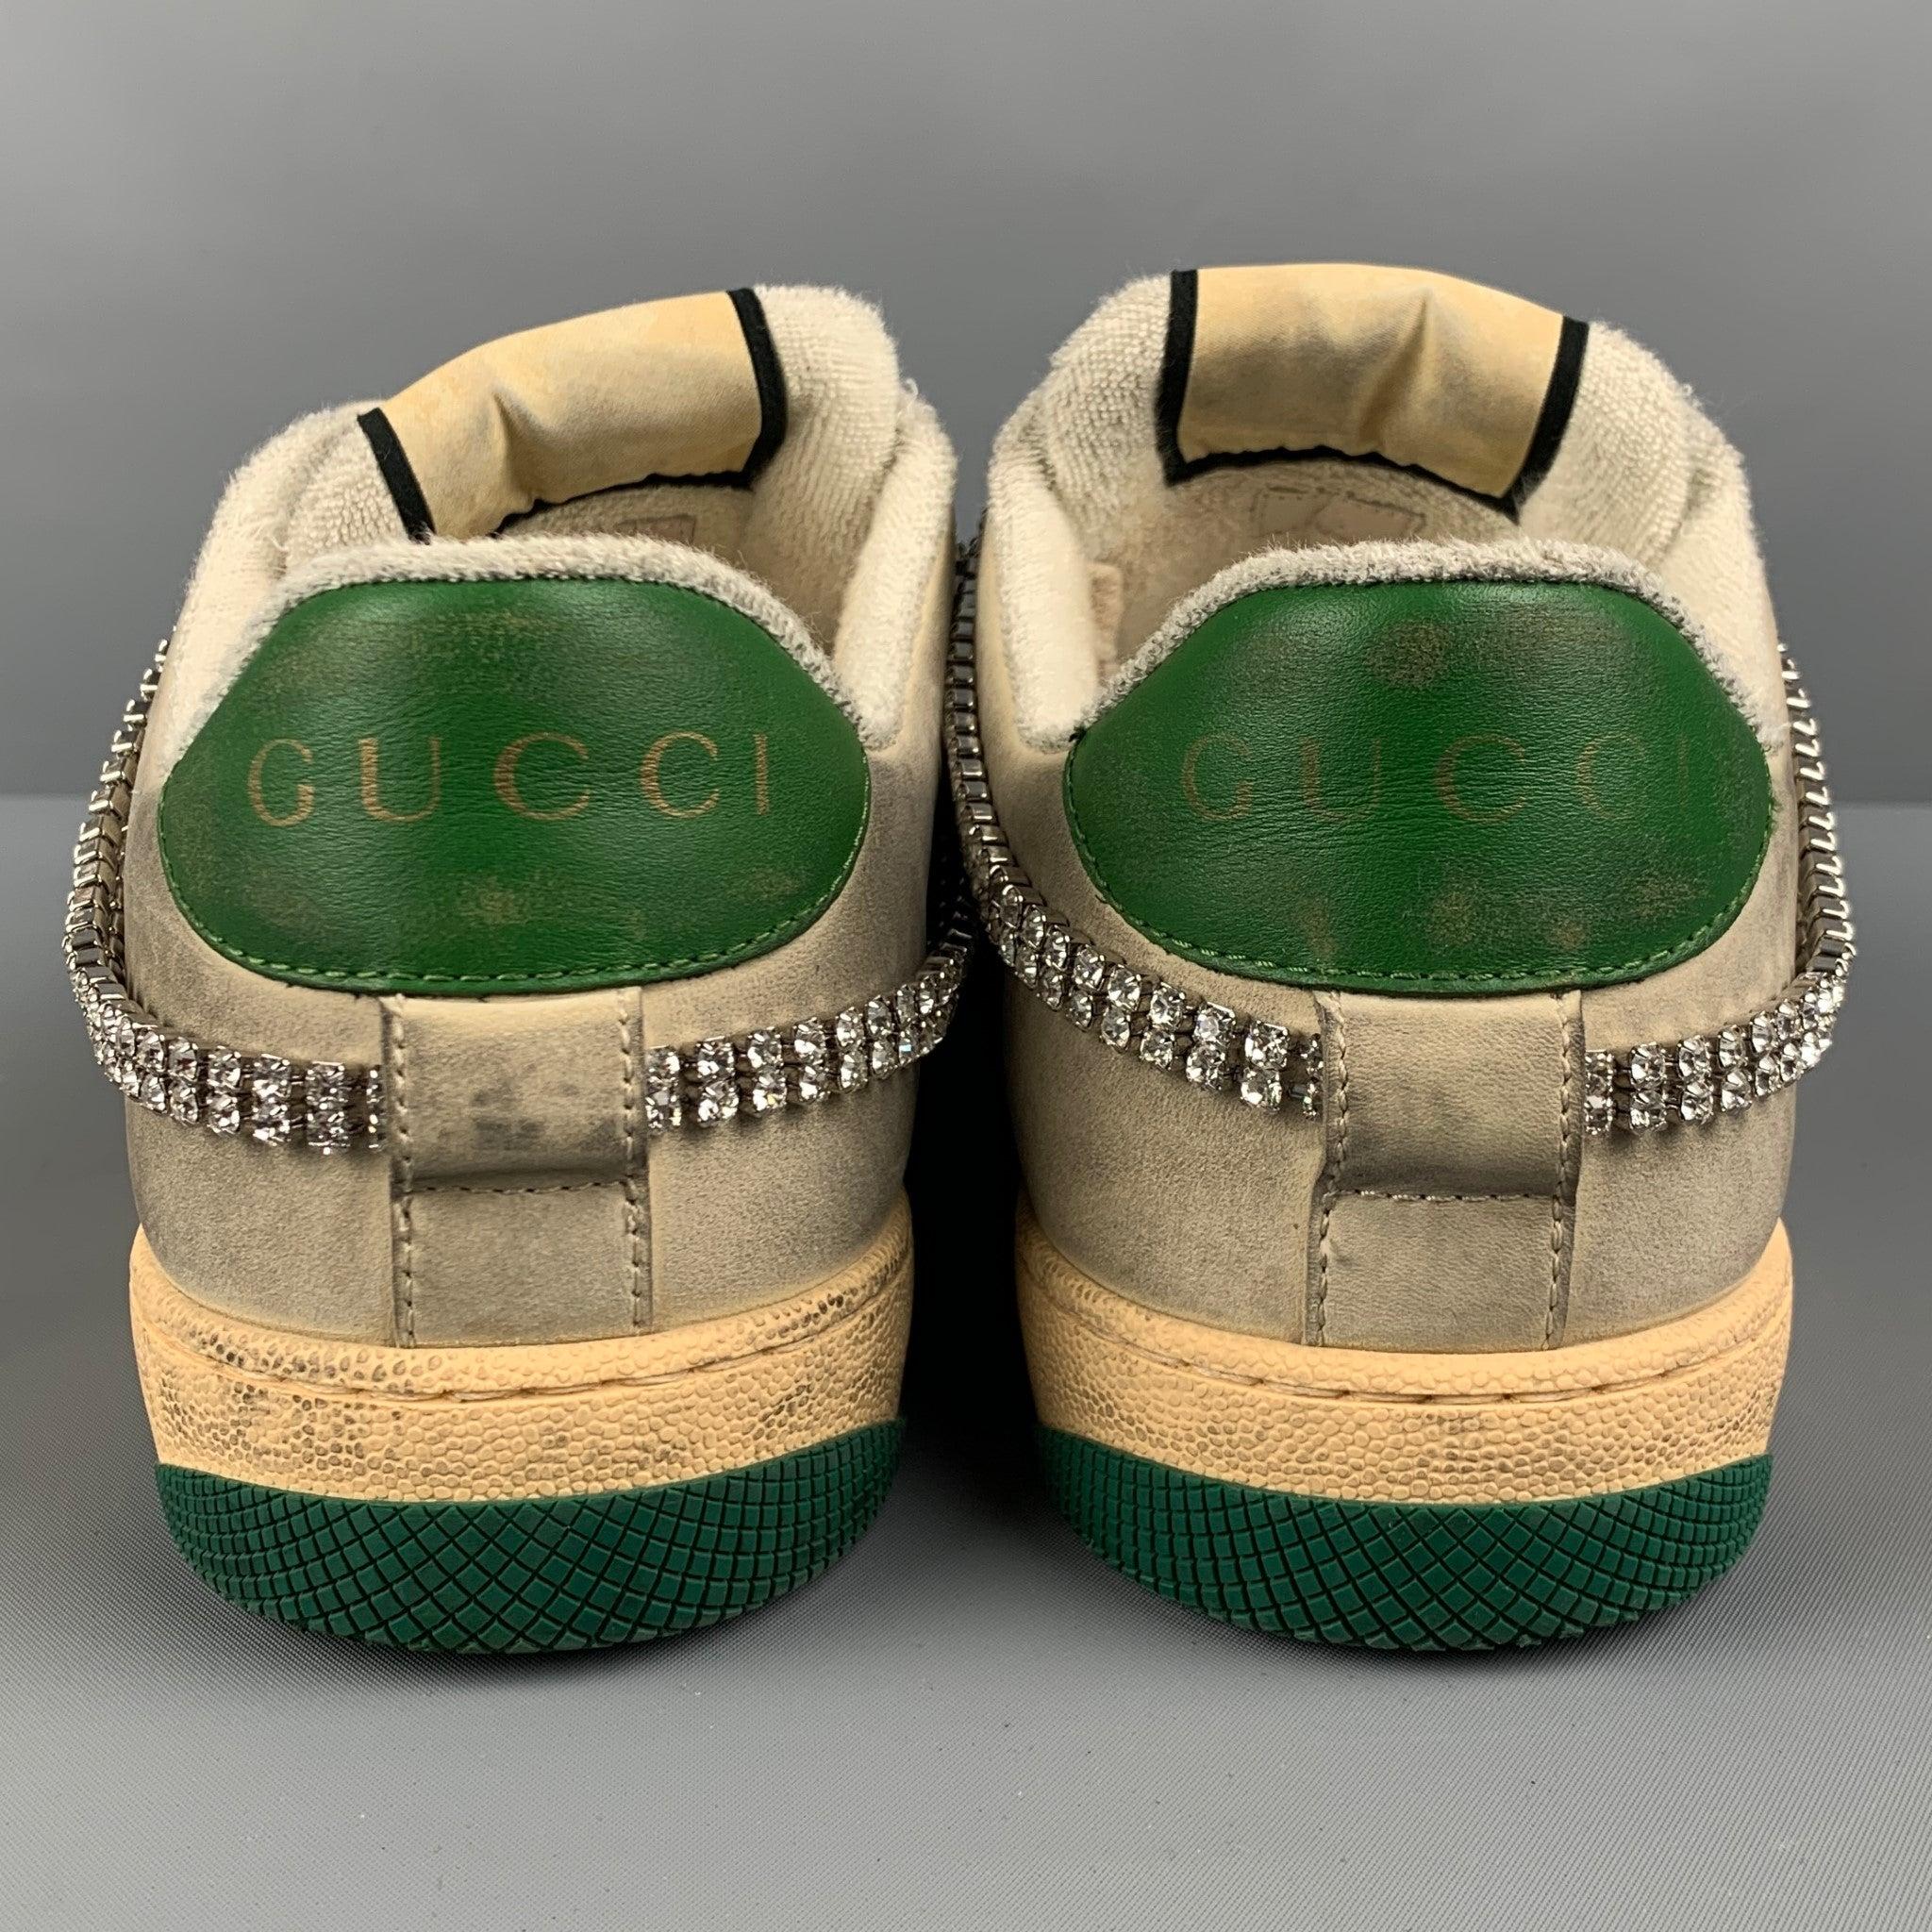 GUCCI Size 8 Off White Distressed Leather Lace Up Crystal Screener Sneakers In Good Condition For Sale In San Francisco, CA